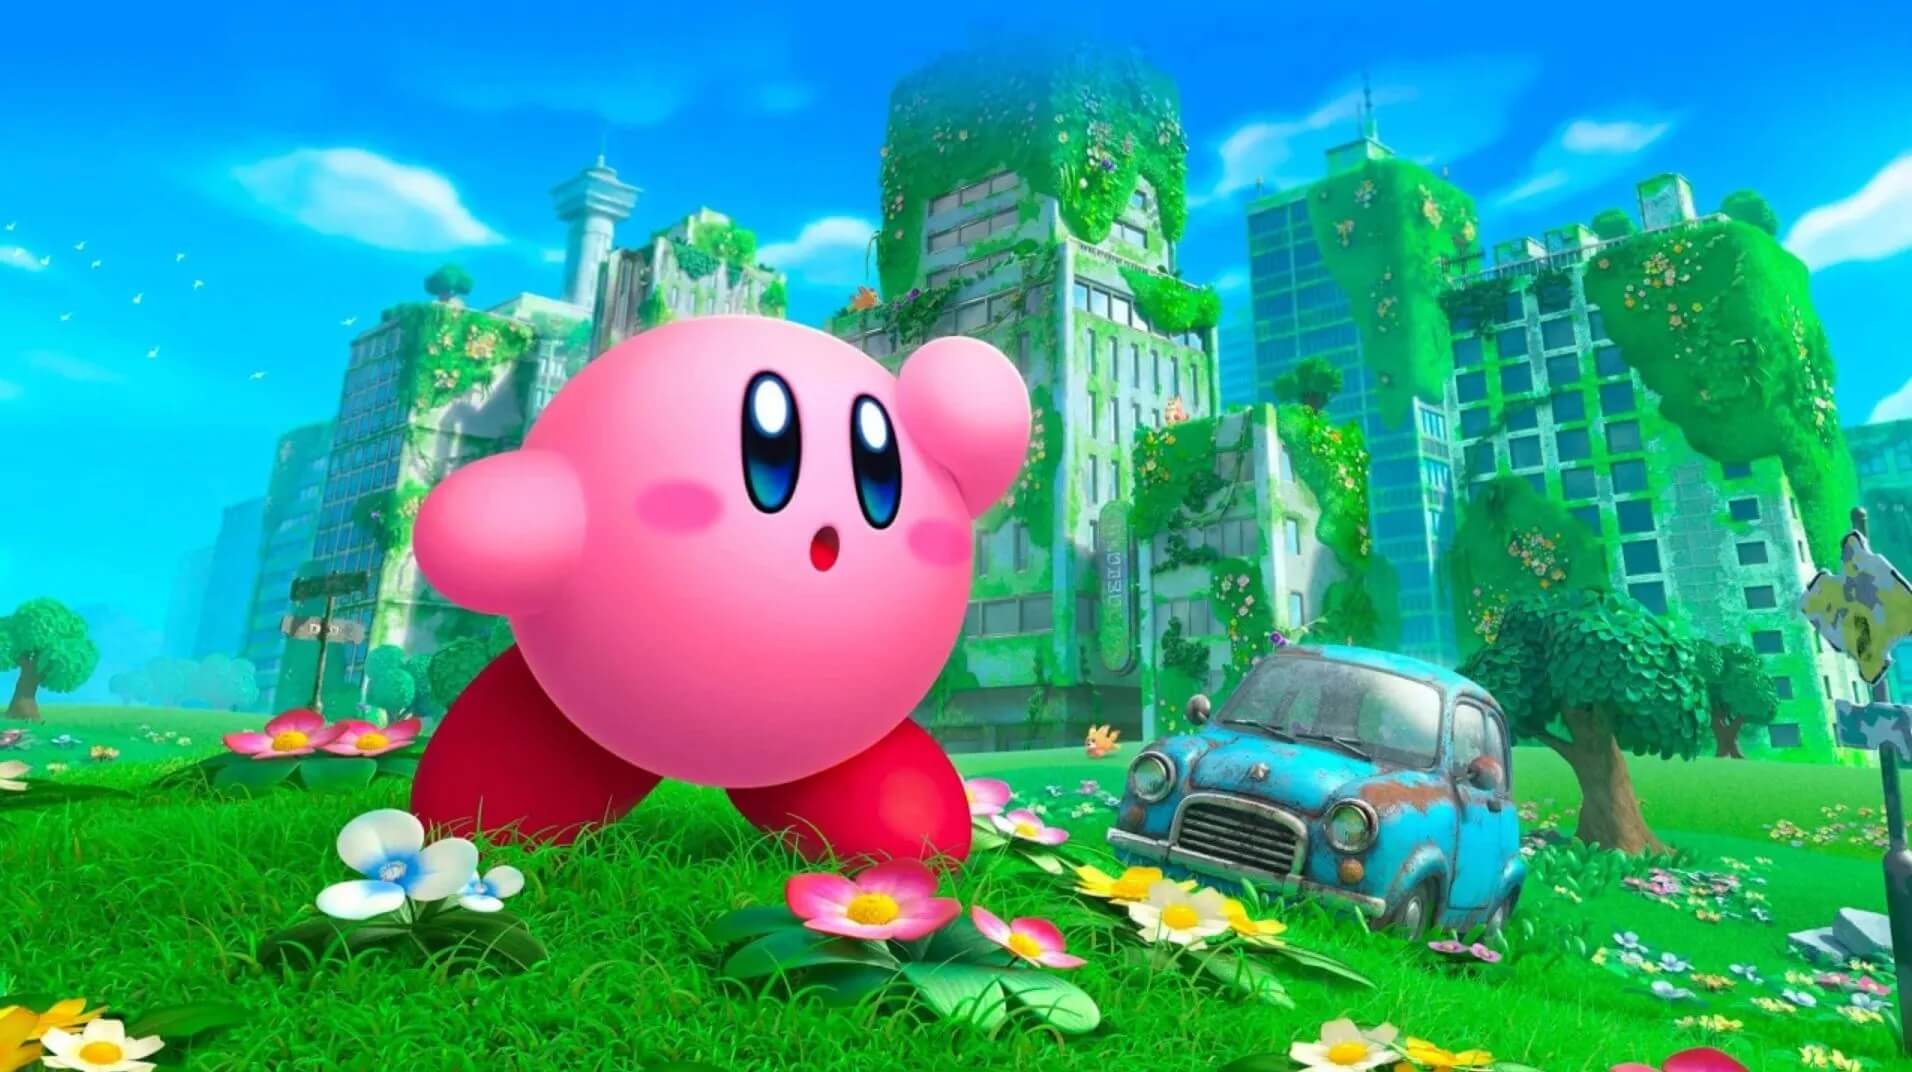 Adorable New Kirby Game Out Now on Nintendo Switch - CNET